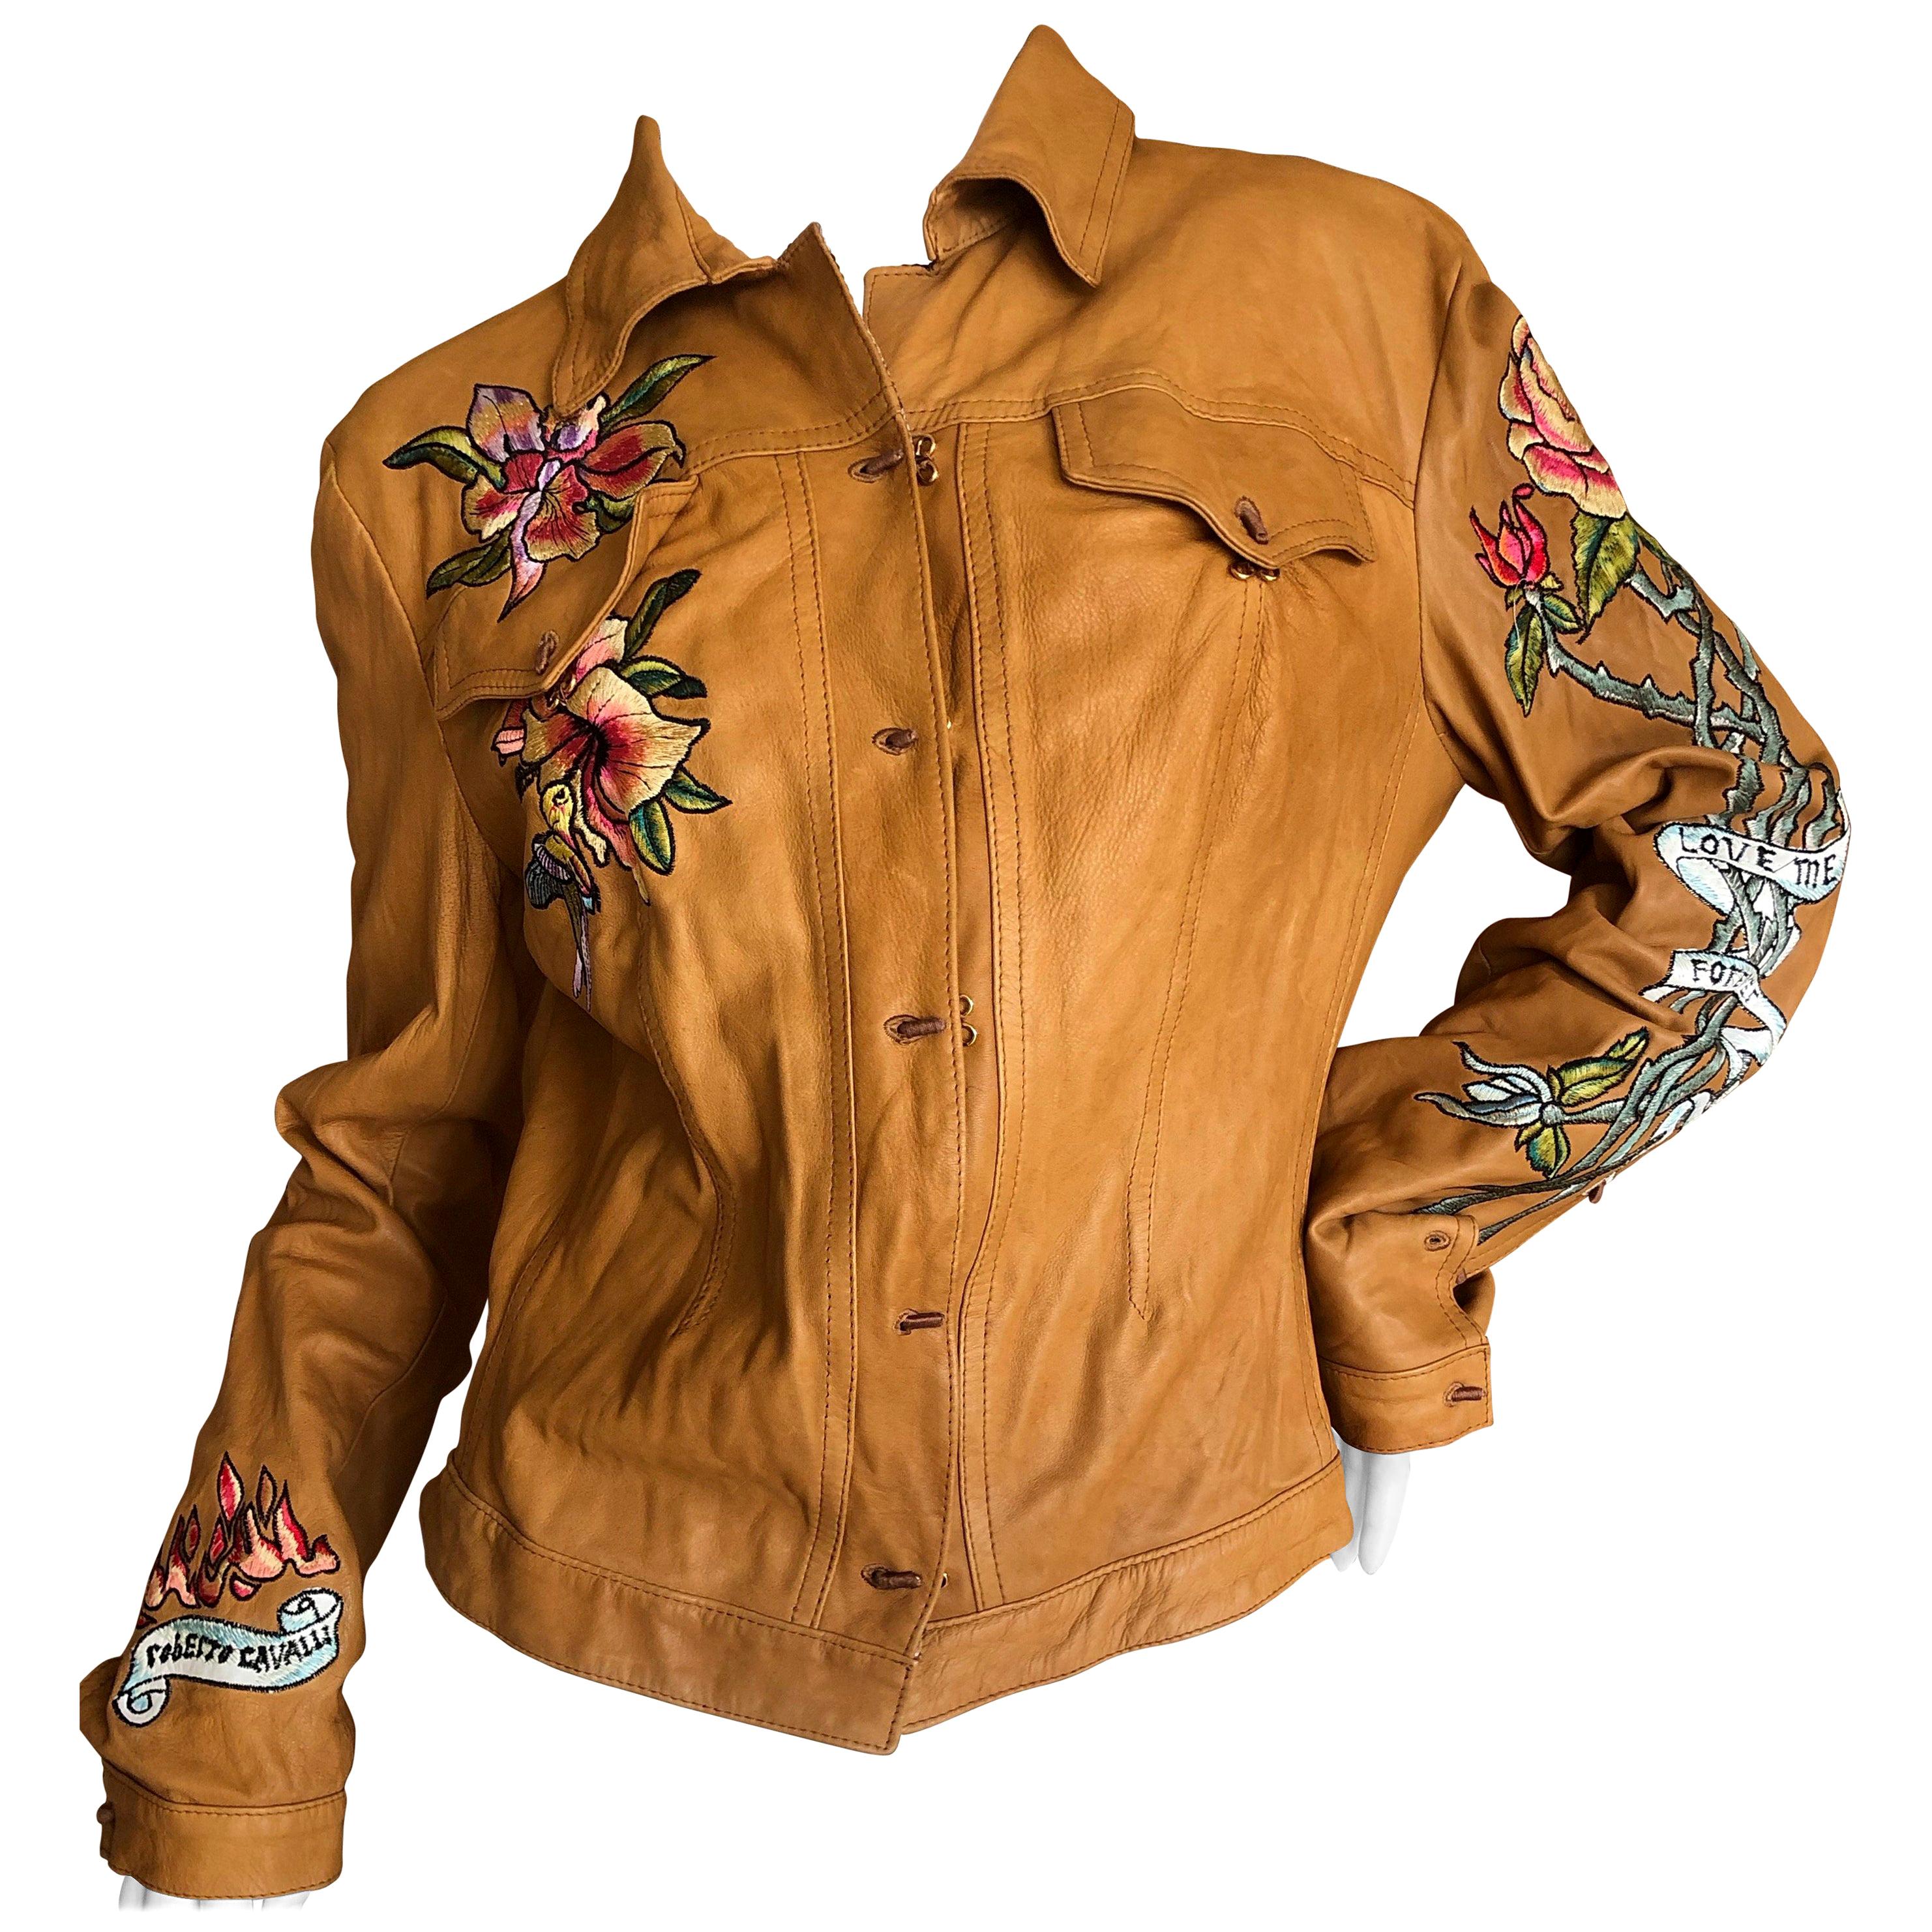 Roberto Cavalli Collectable Leather Jacket with Tattoo Embroidery 2003 For Sale